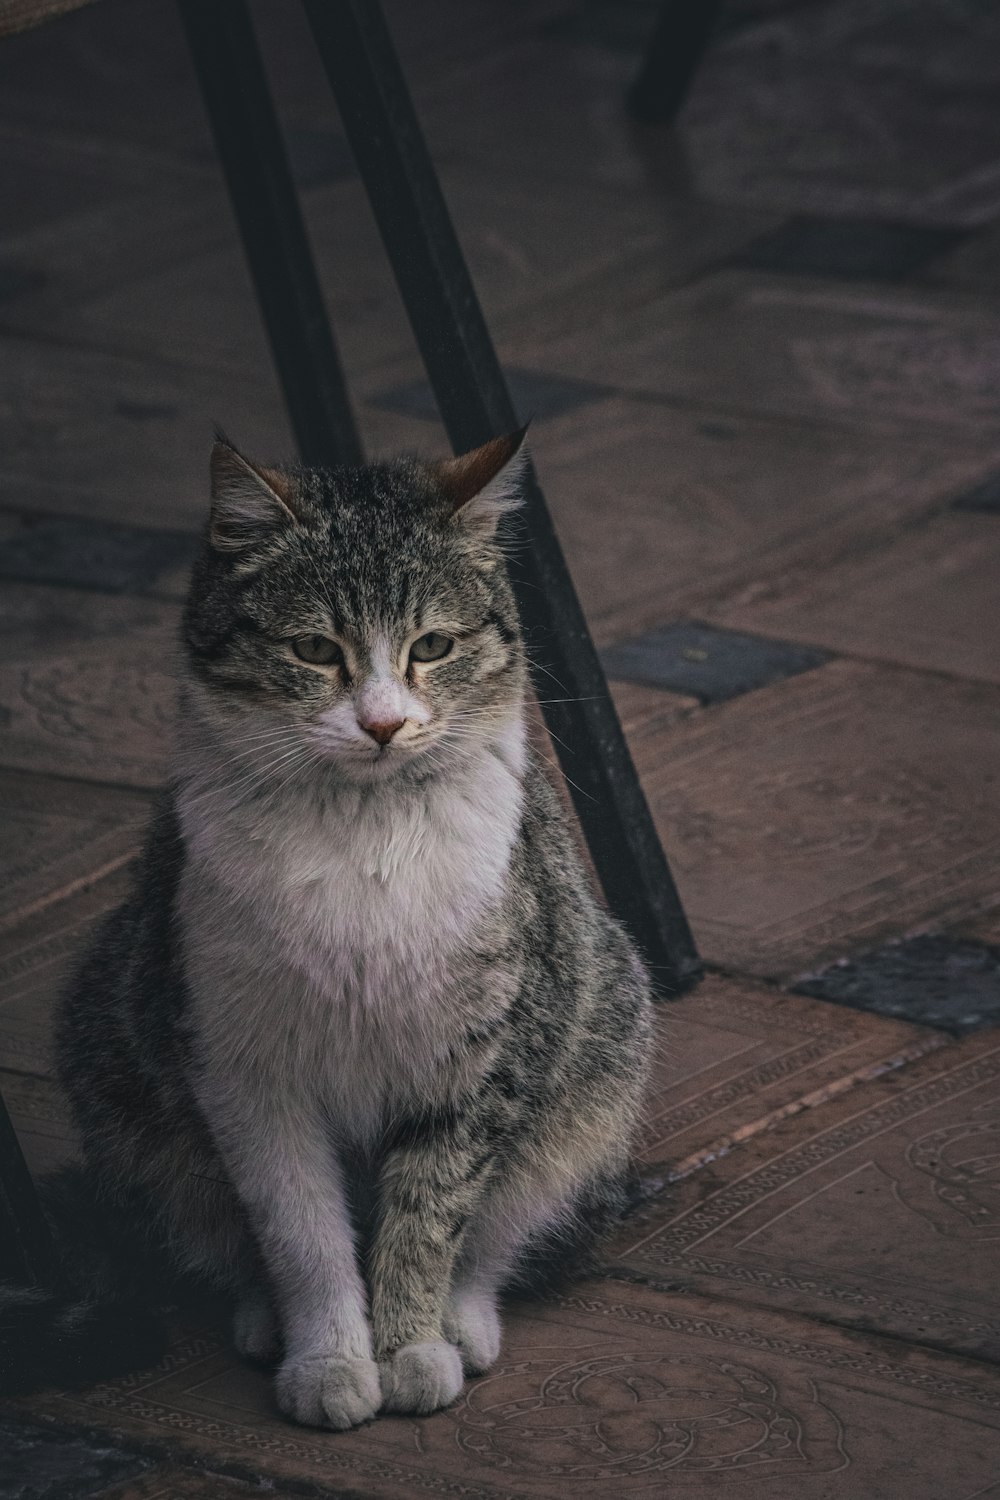 a grey and white cat sitting on a wooden floor